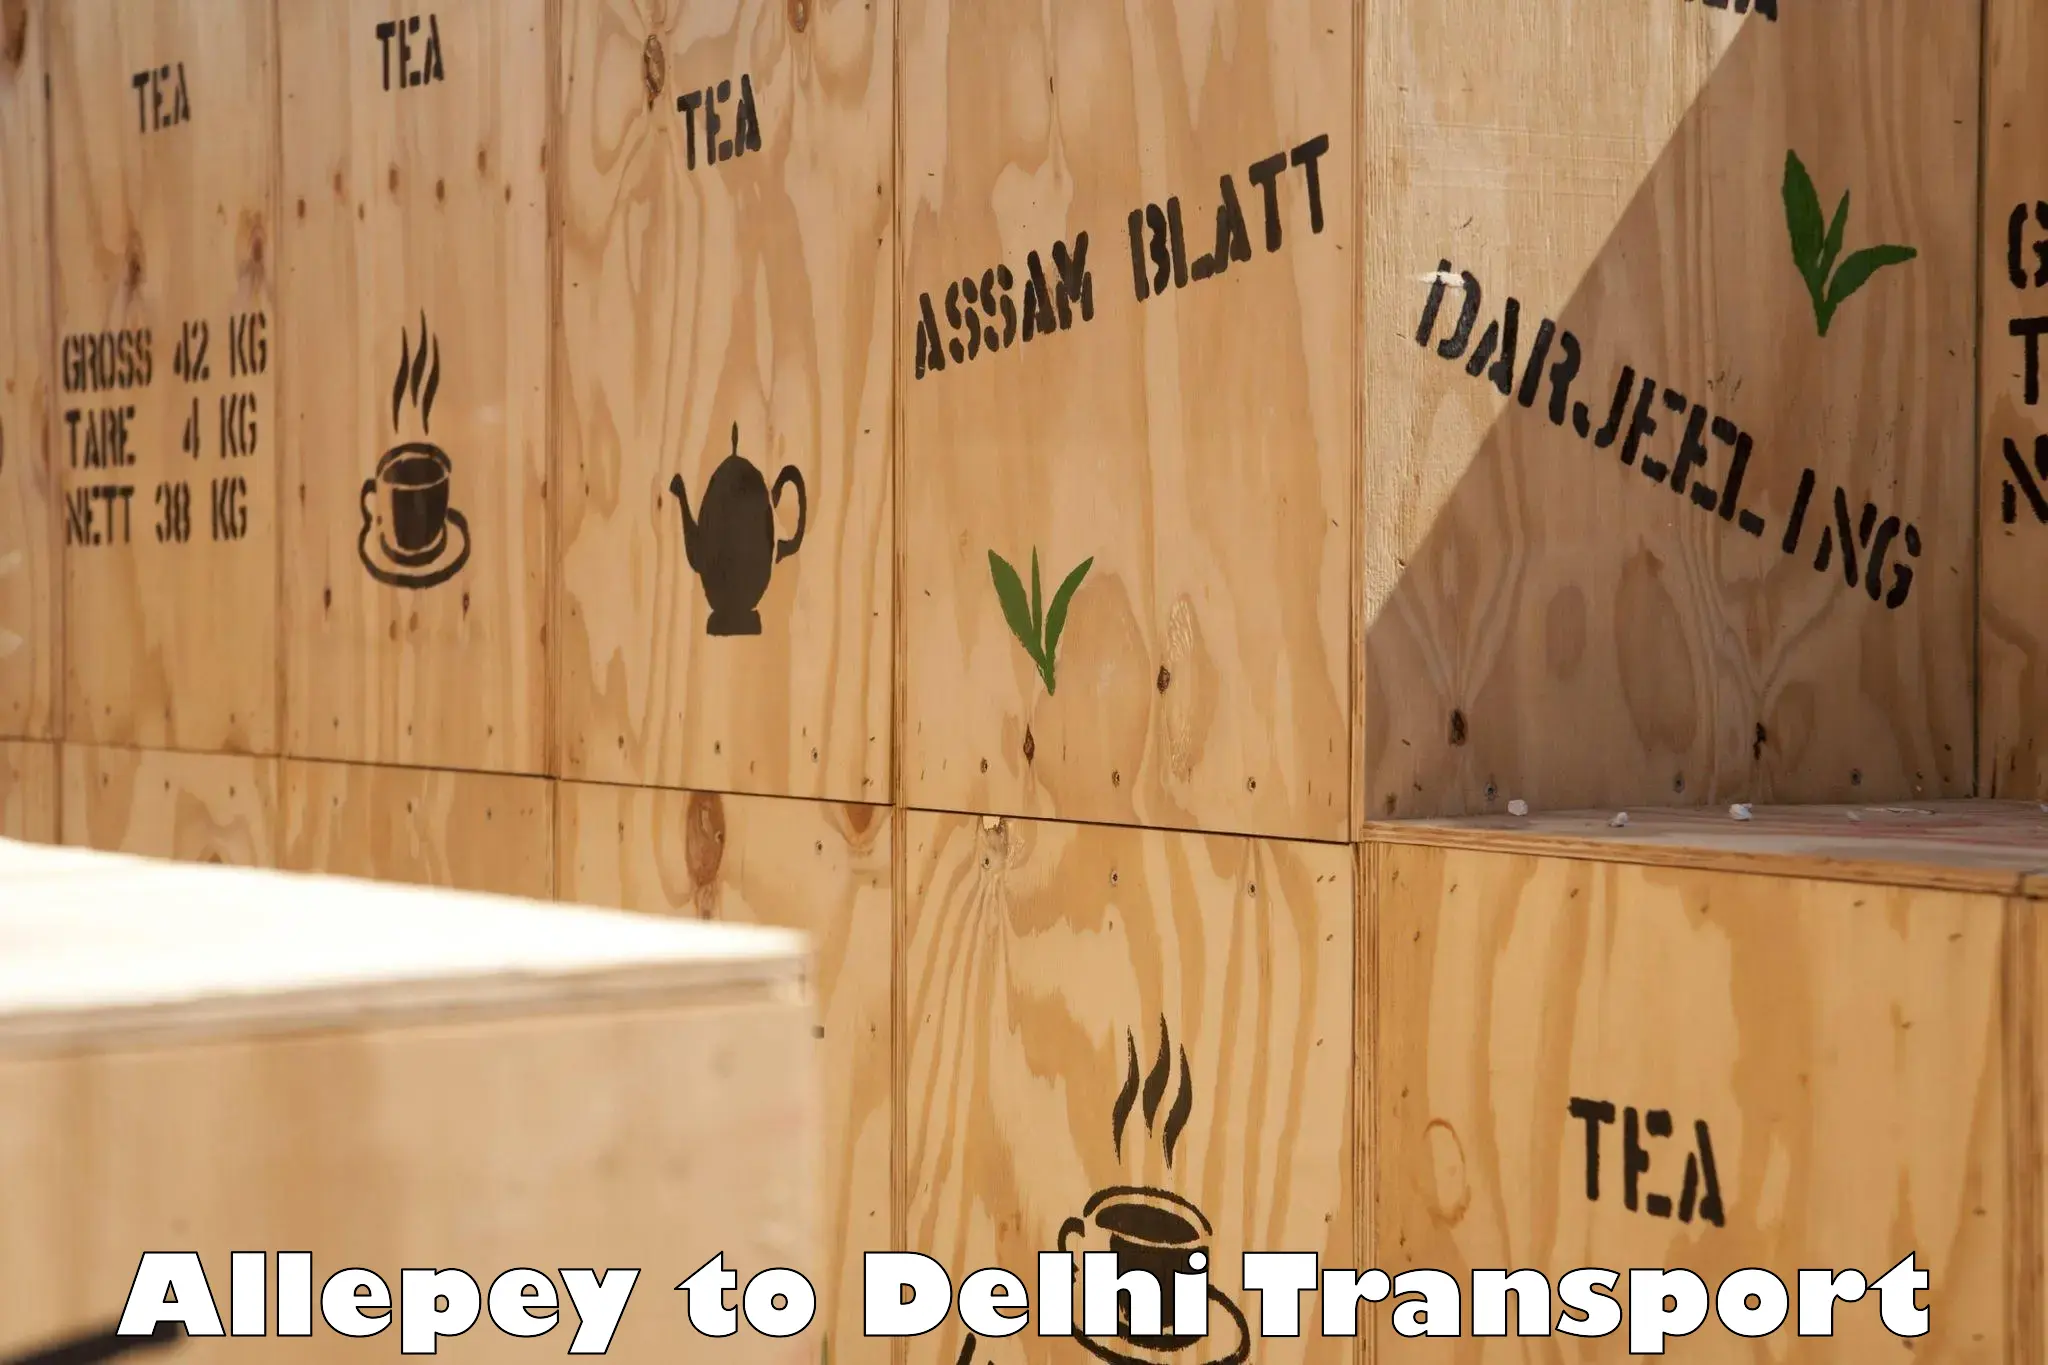 Cycle transportation service Allepey to Delhi